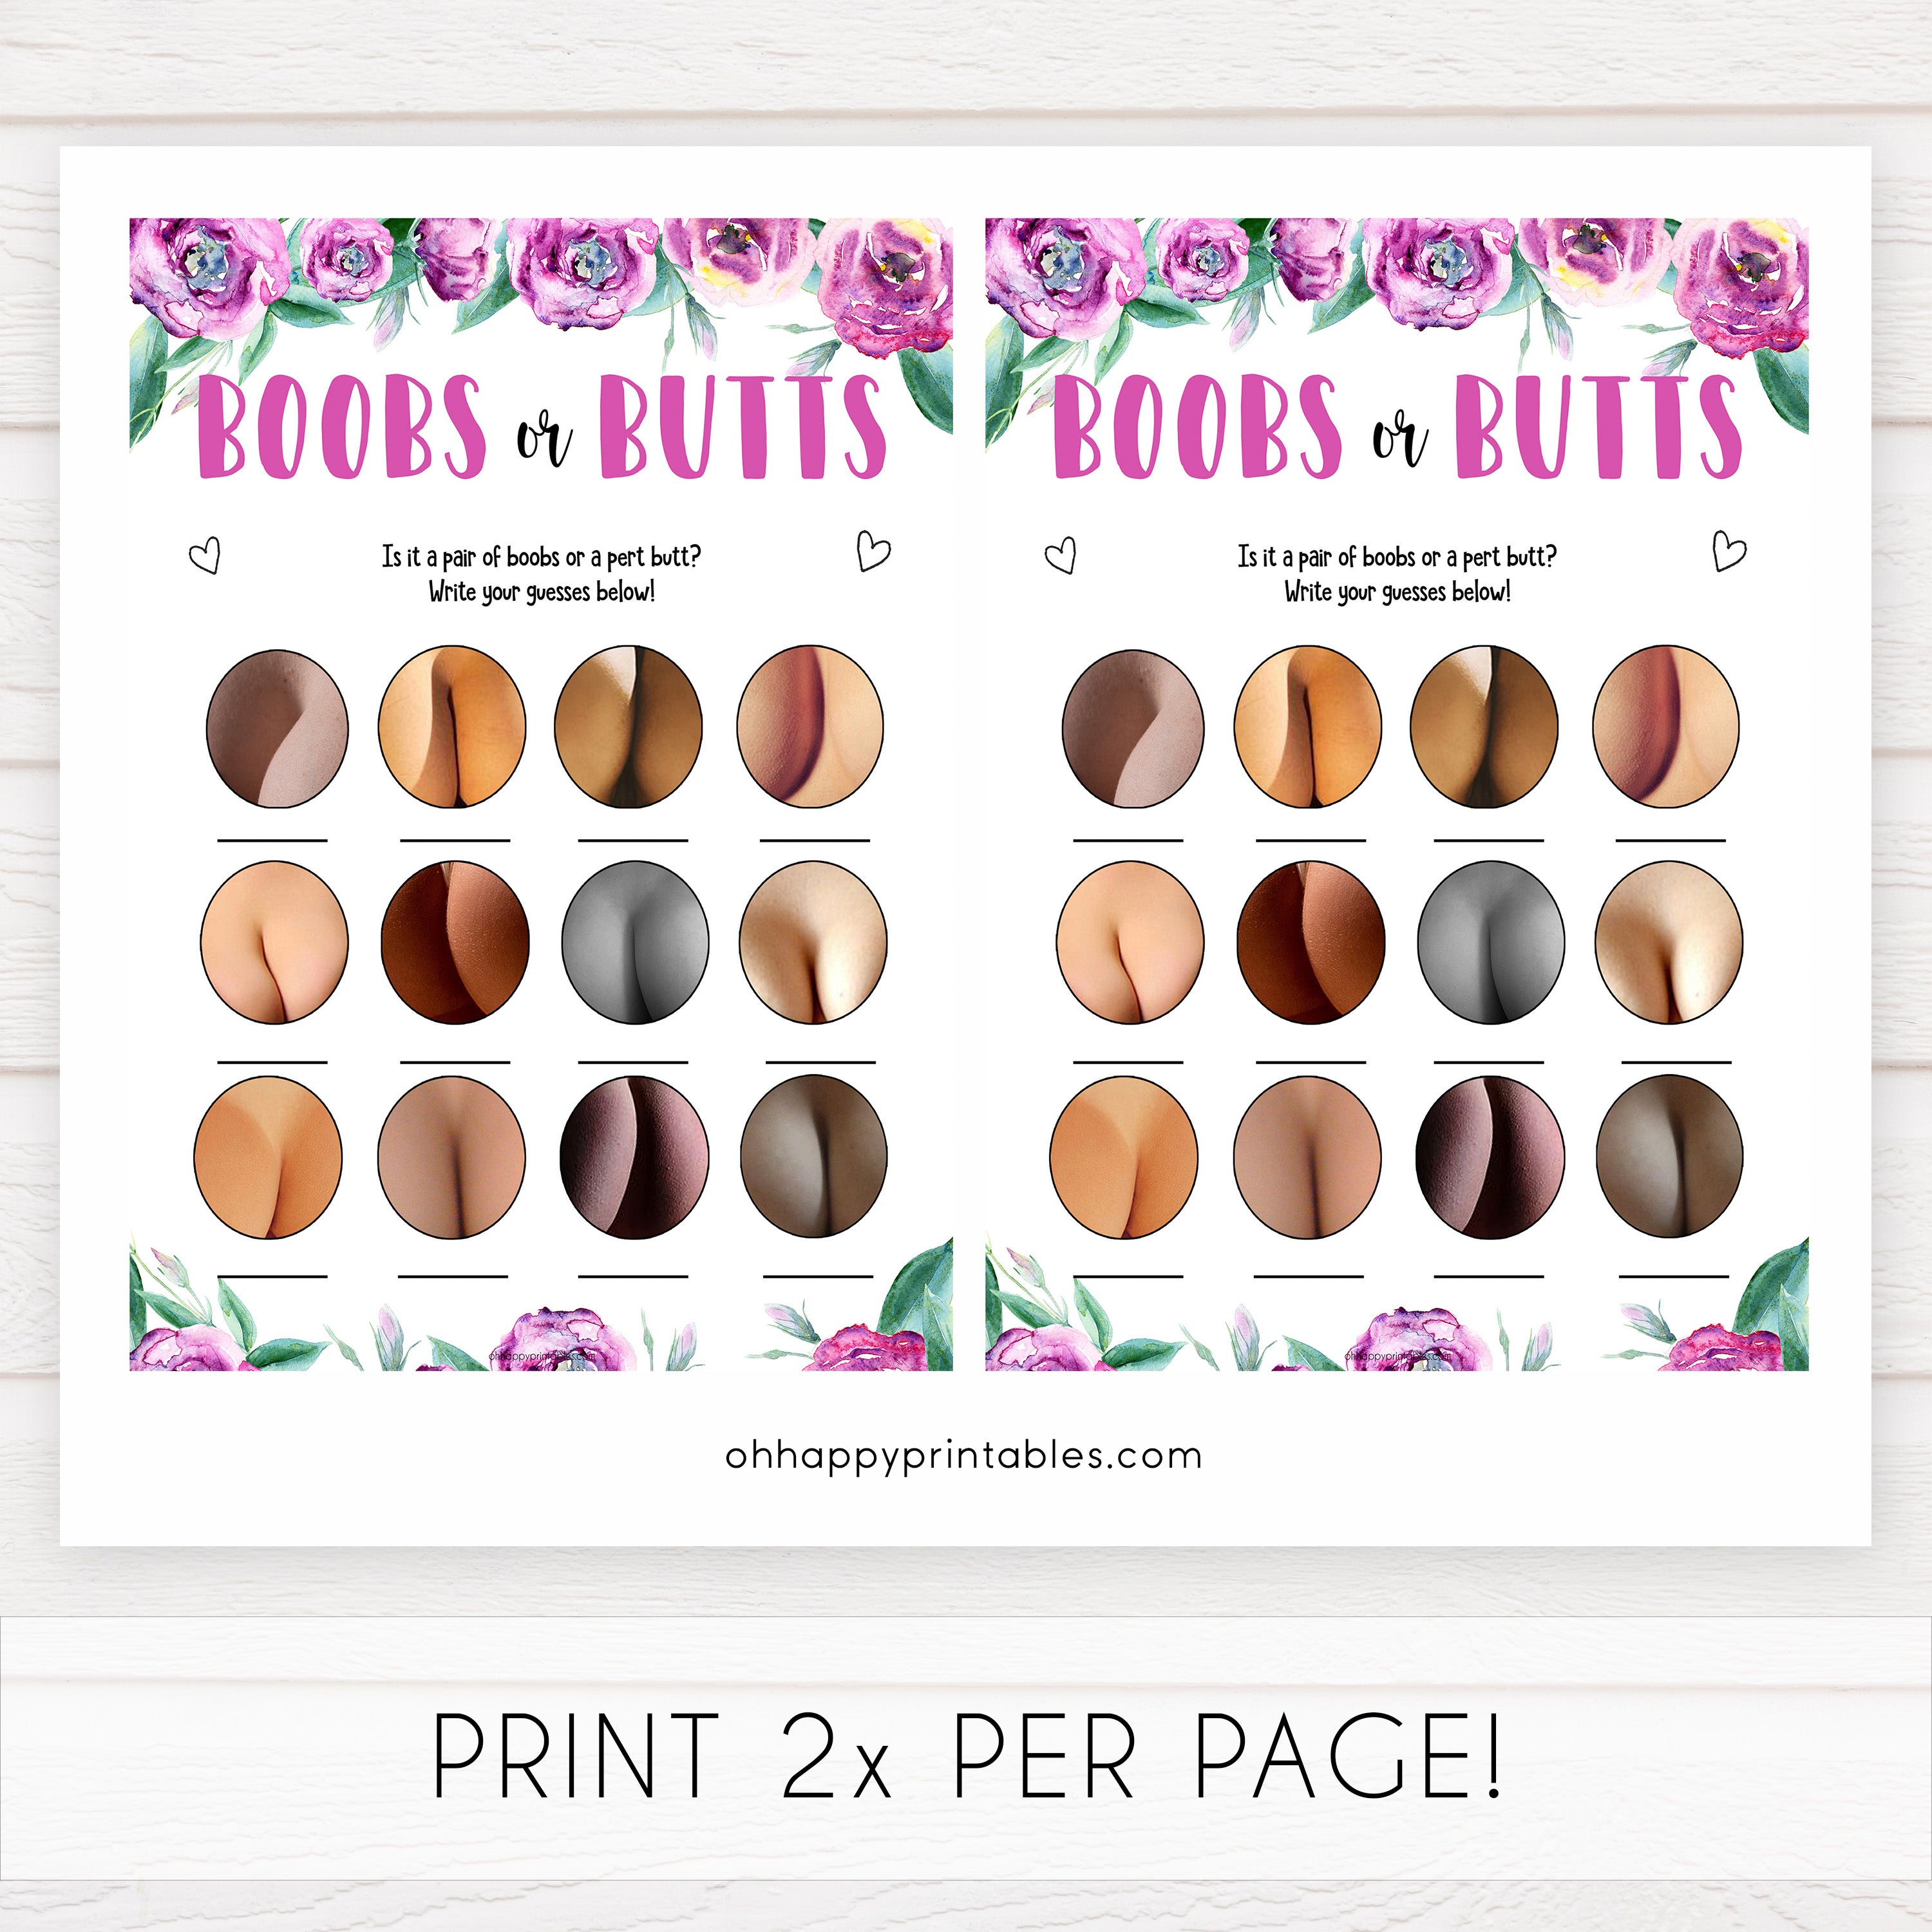 Purple peonies boobs or butts baby shower games, printable baby shower games, fun baby shower games, baby shower games, popular baby shower games, floral baby shower games, purple baby shower themes